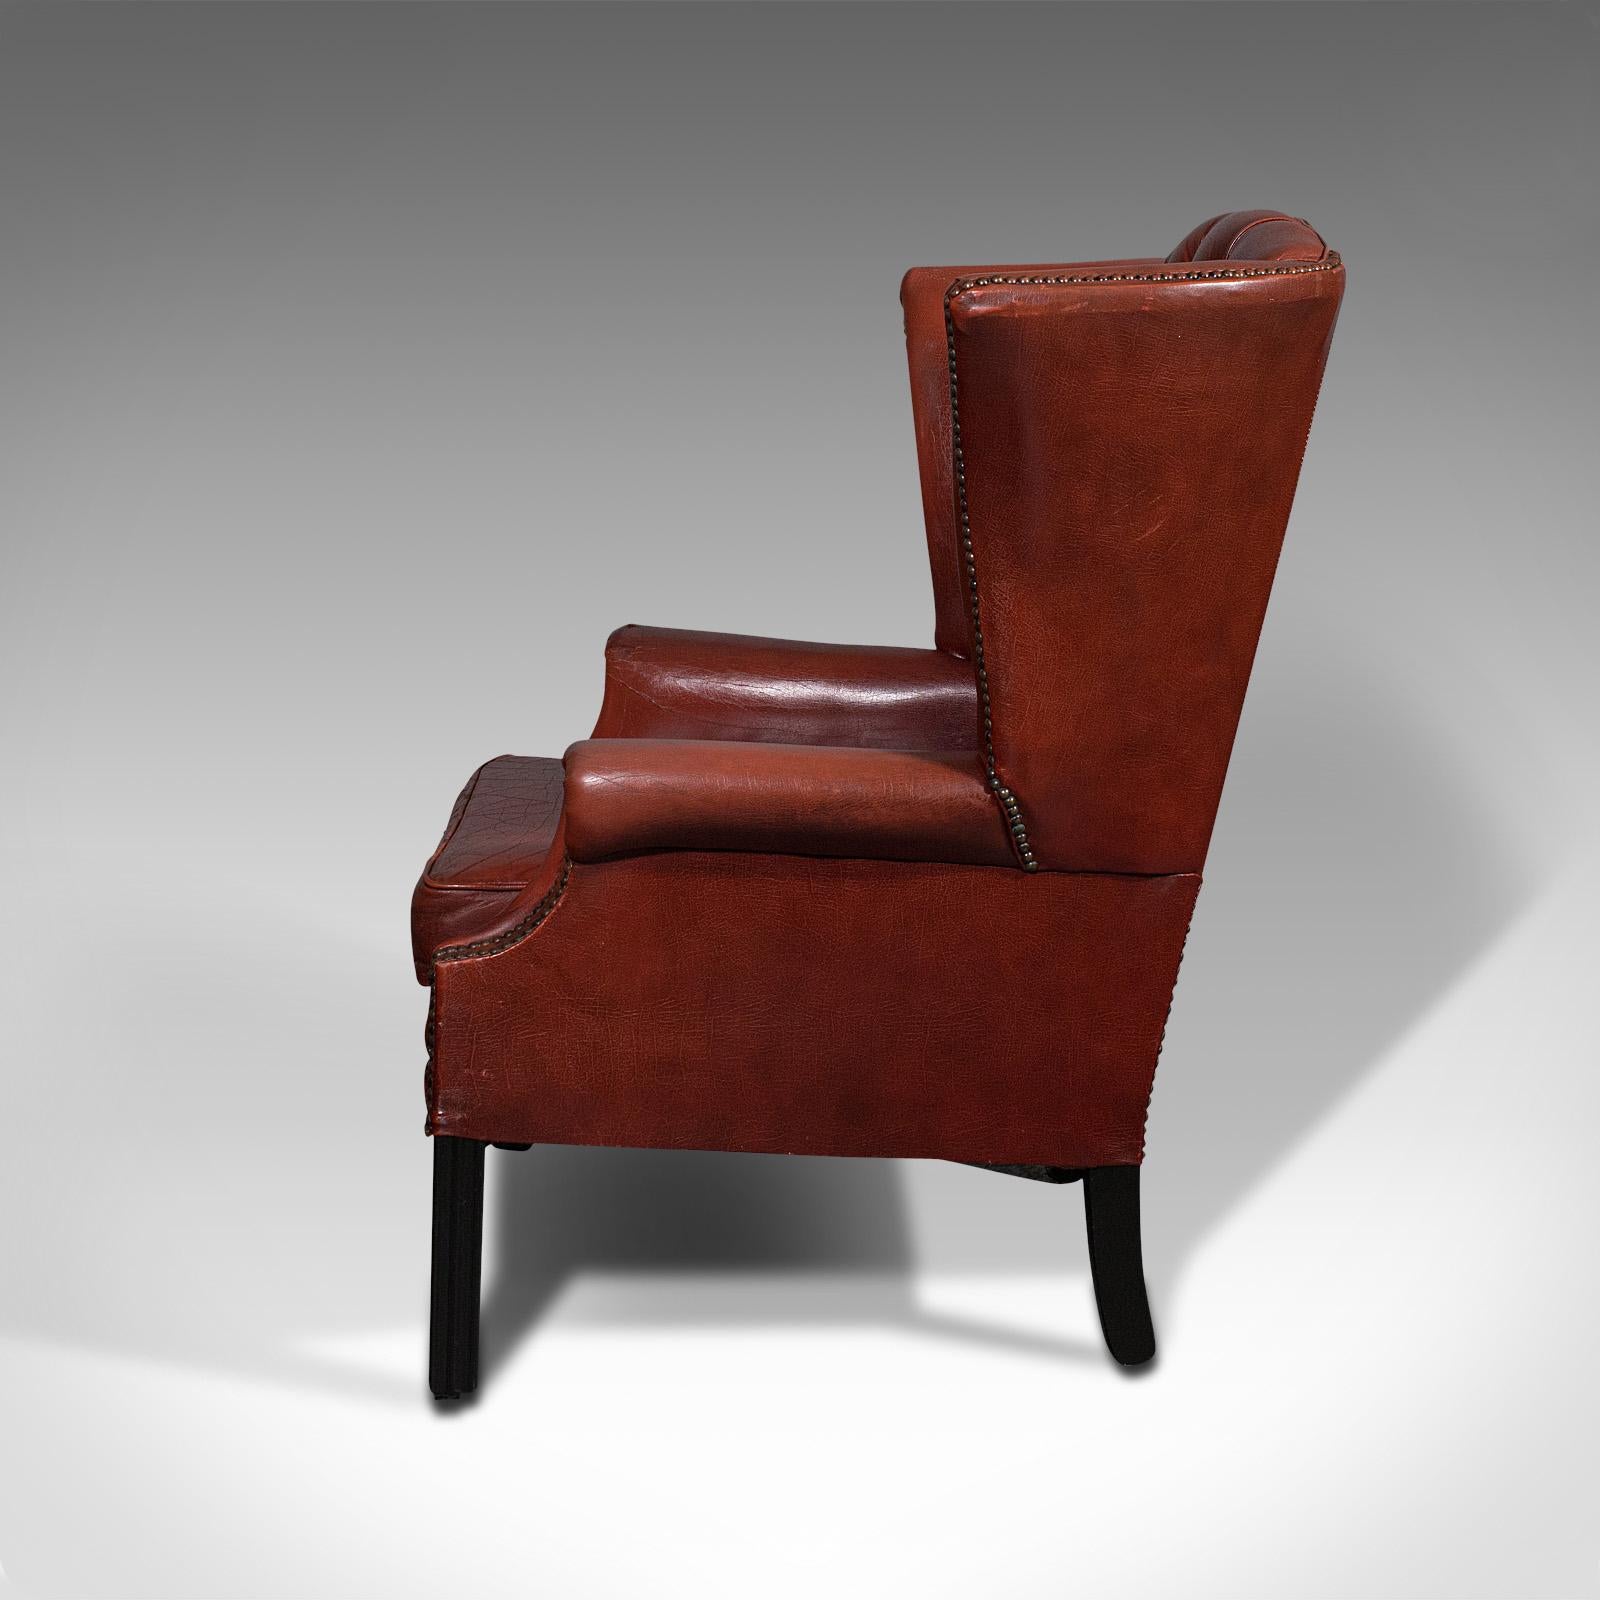 British Pair of Vintage Clubhouse Wingback Chairs, English, Leather, Armchair, C.1950 For Sale